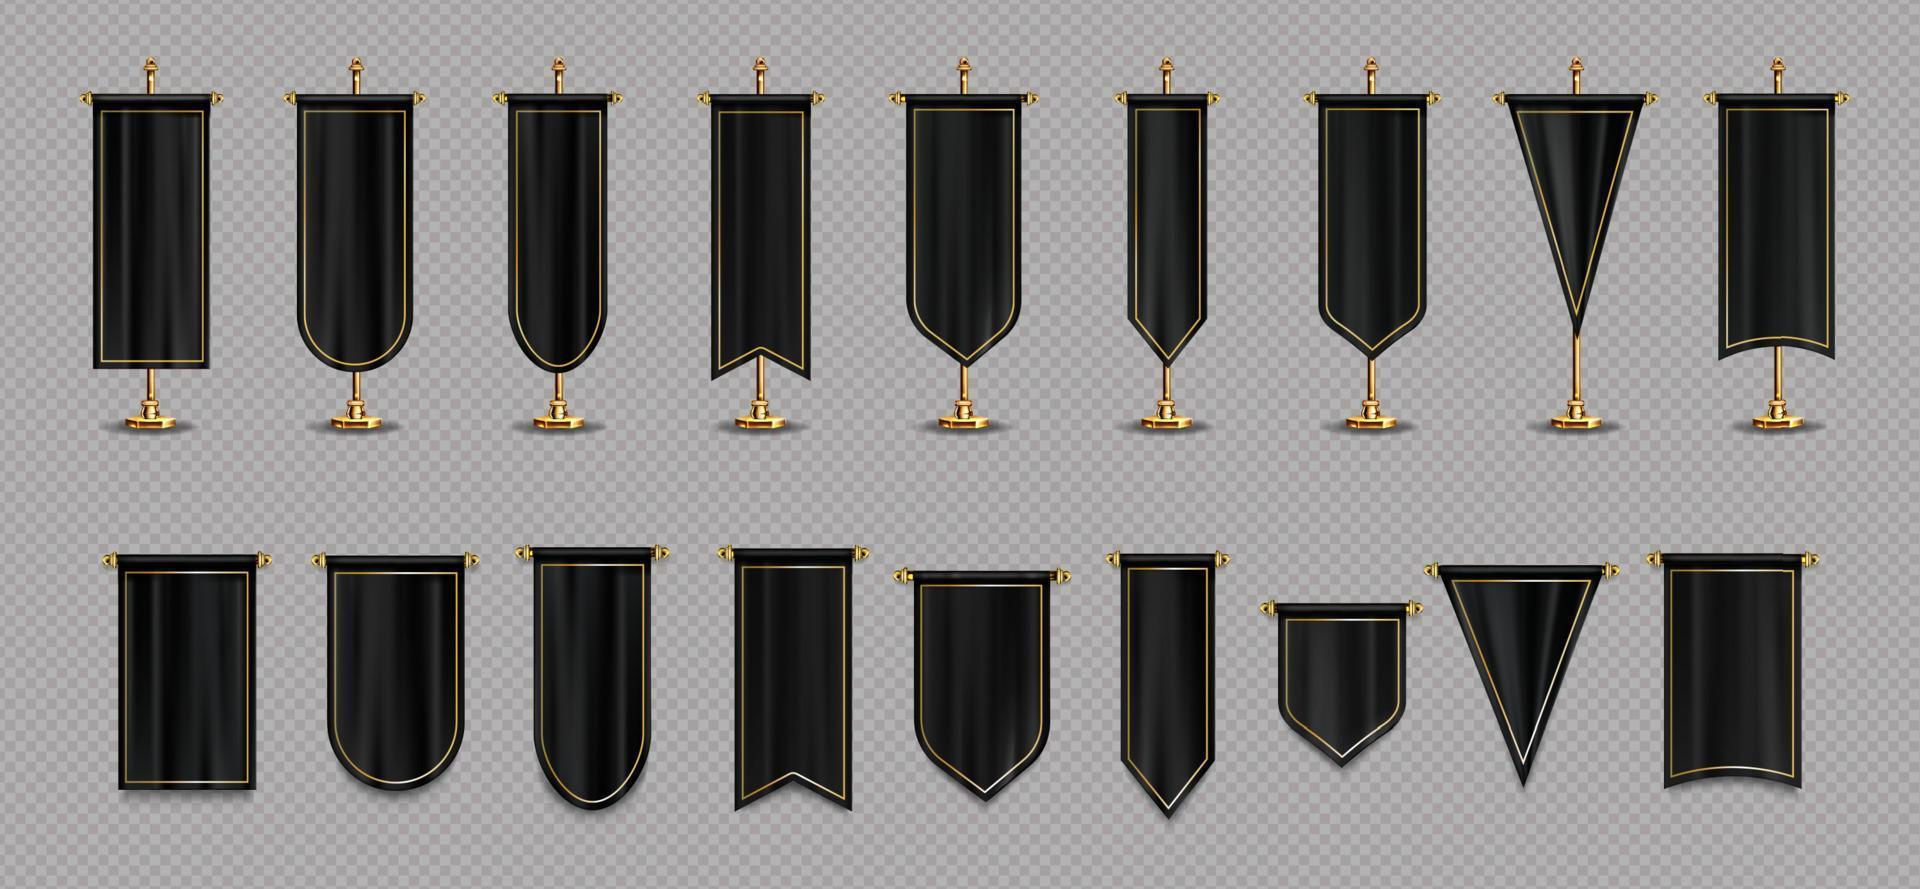 Pennant flags of black and gold colors mockup set vector